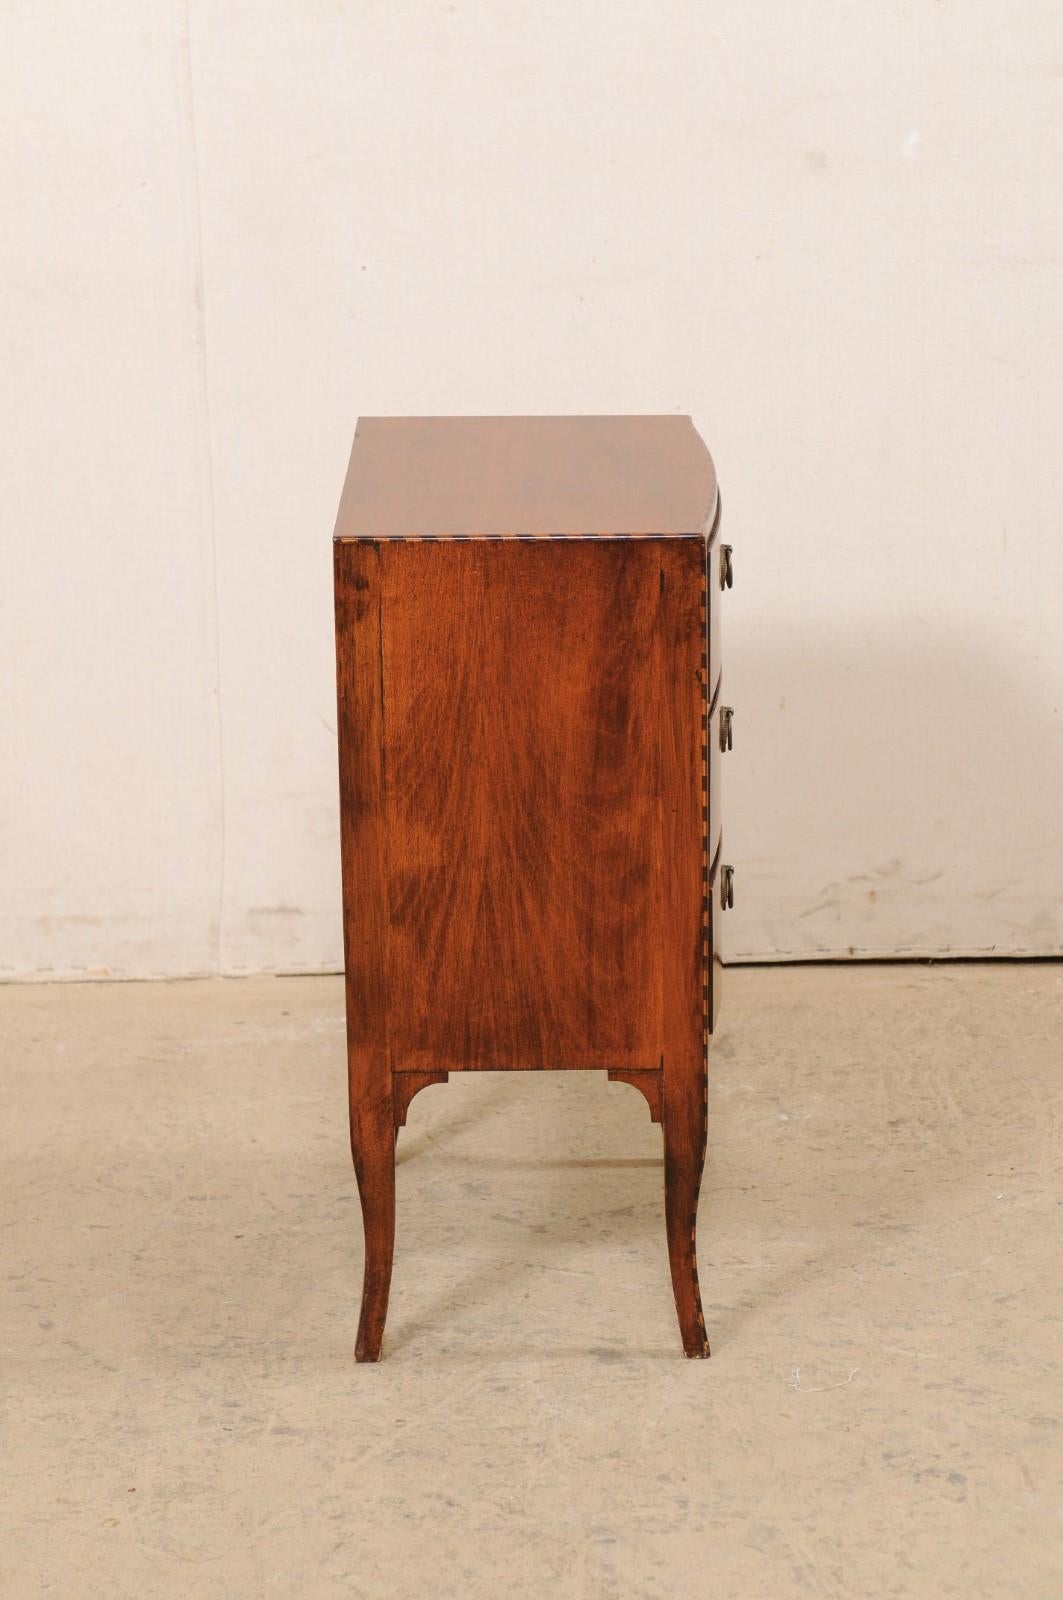 Small Italian Raised Side Chest of Drawers w/Roped Inlay Trimming, Mid-20th C For Sale 3